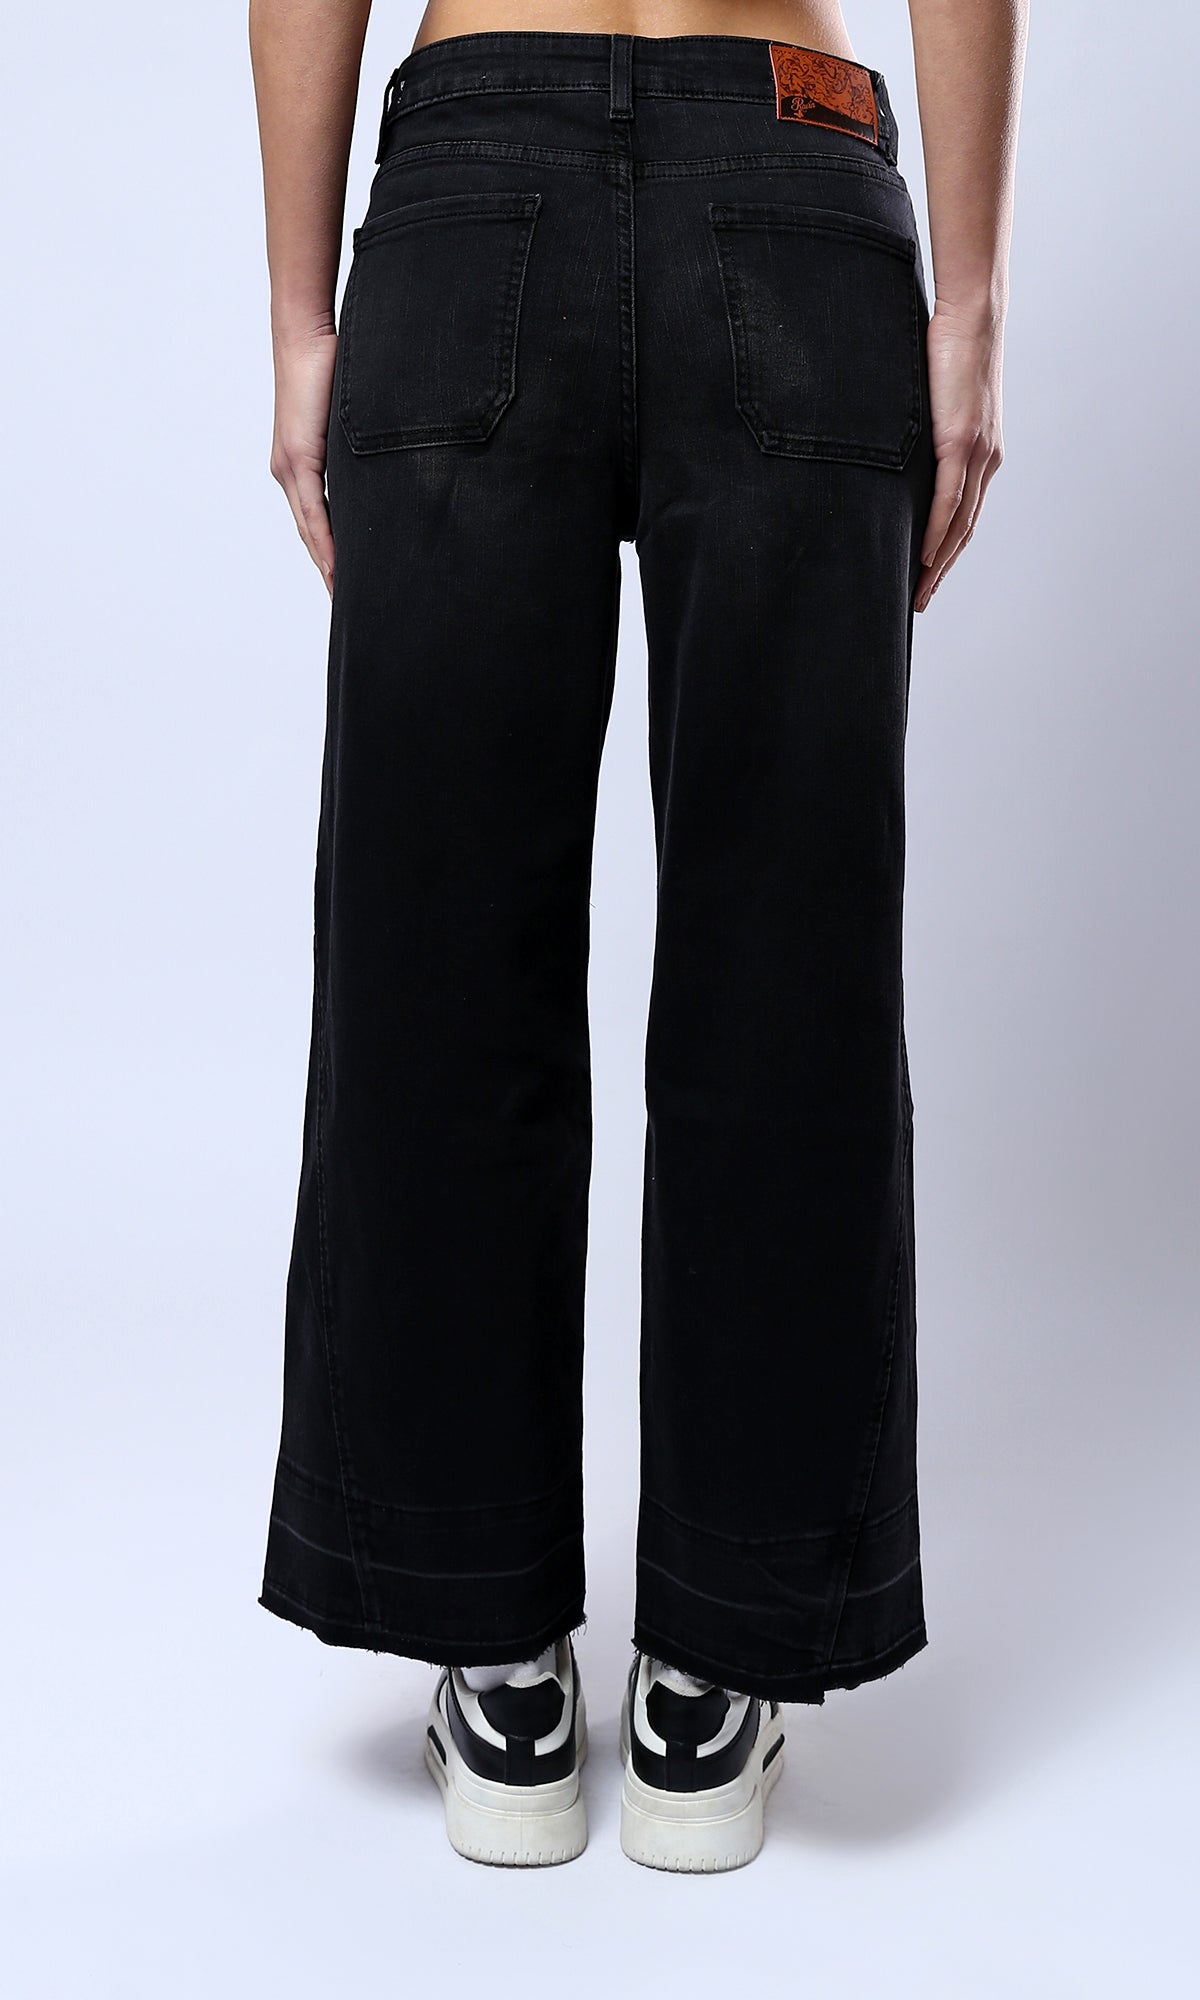 O182220 Solid Black Wide-Leg Jeans With Front Wash